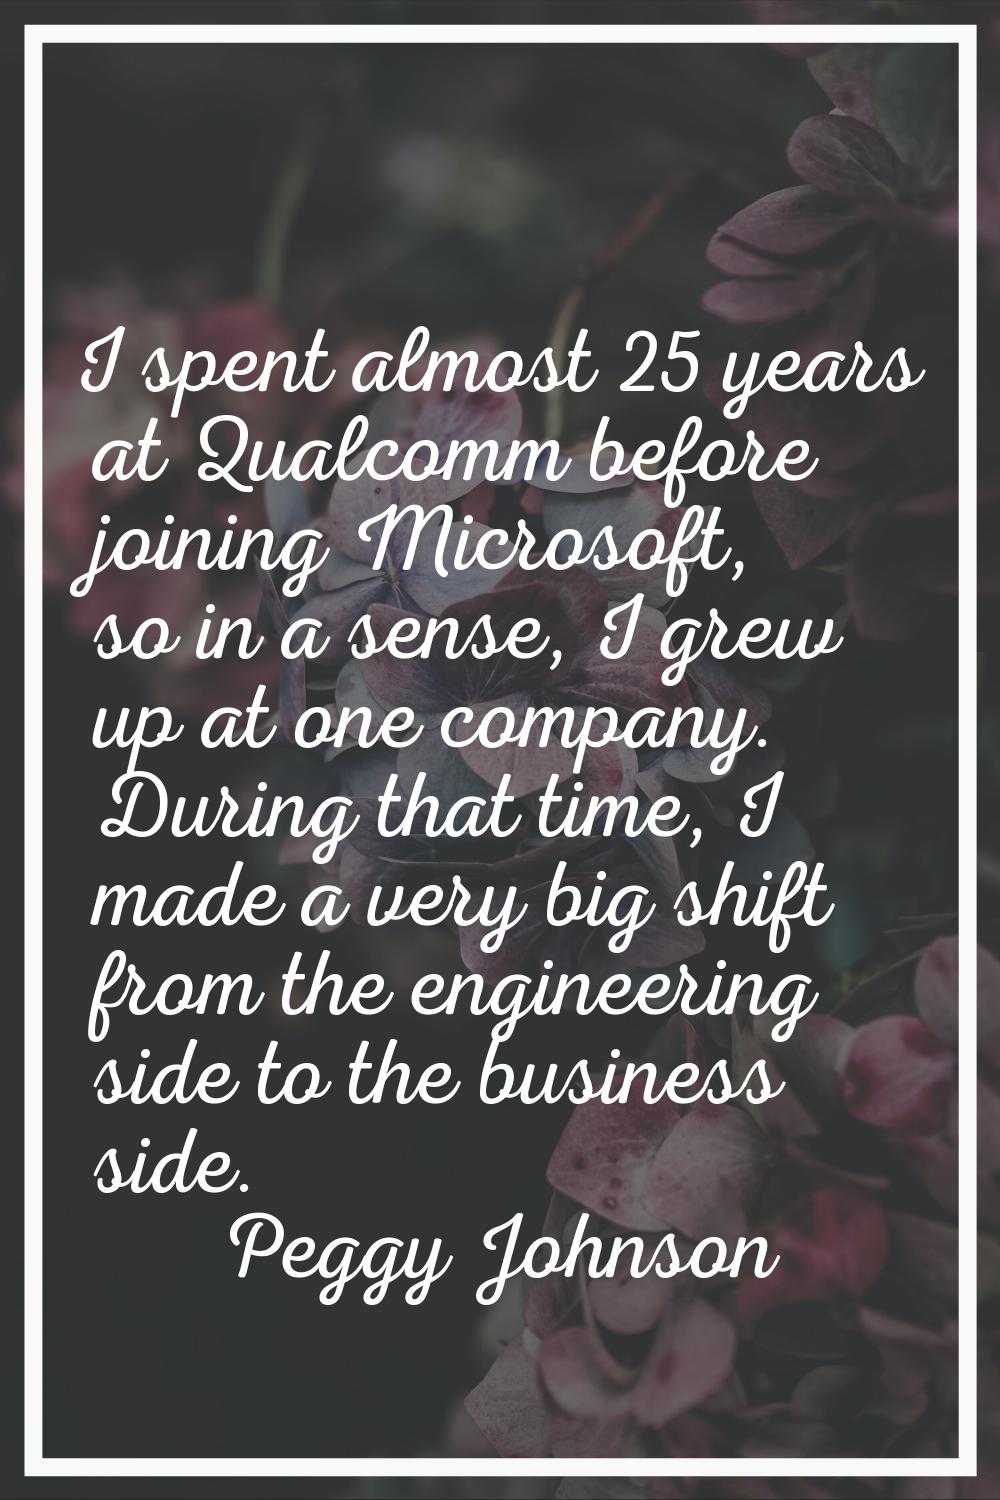 I spent almost 25 years at Qualcomm before joining Microsoft, so in a sense, I grew up at one compa